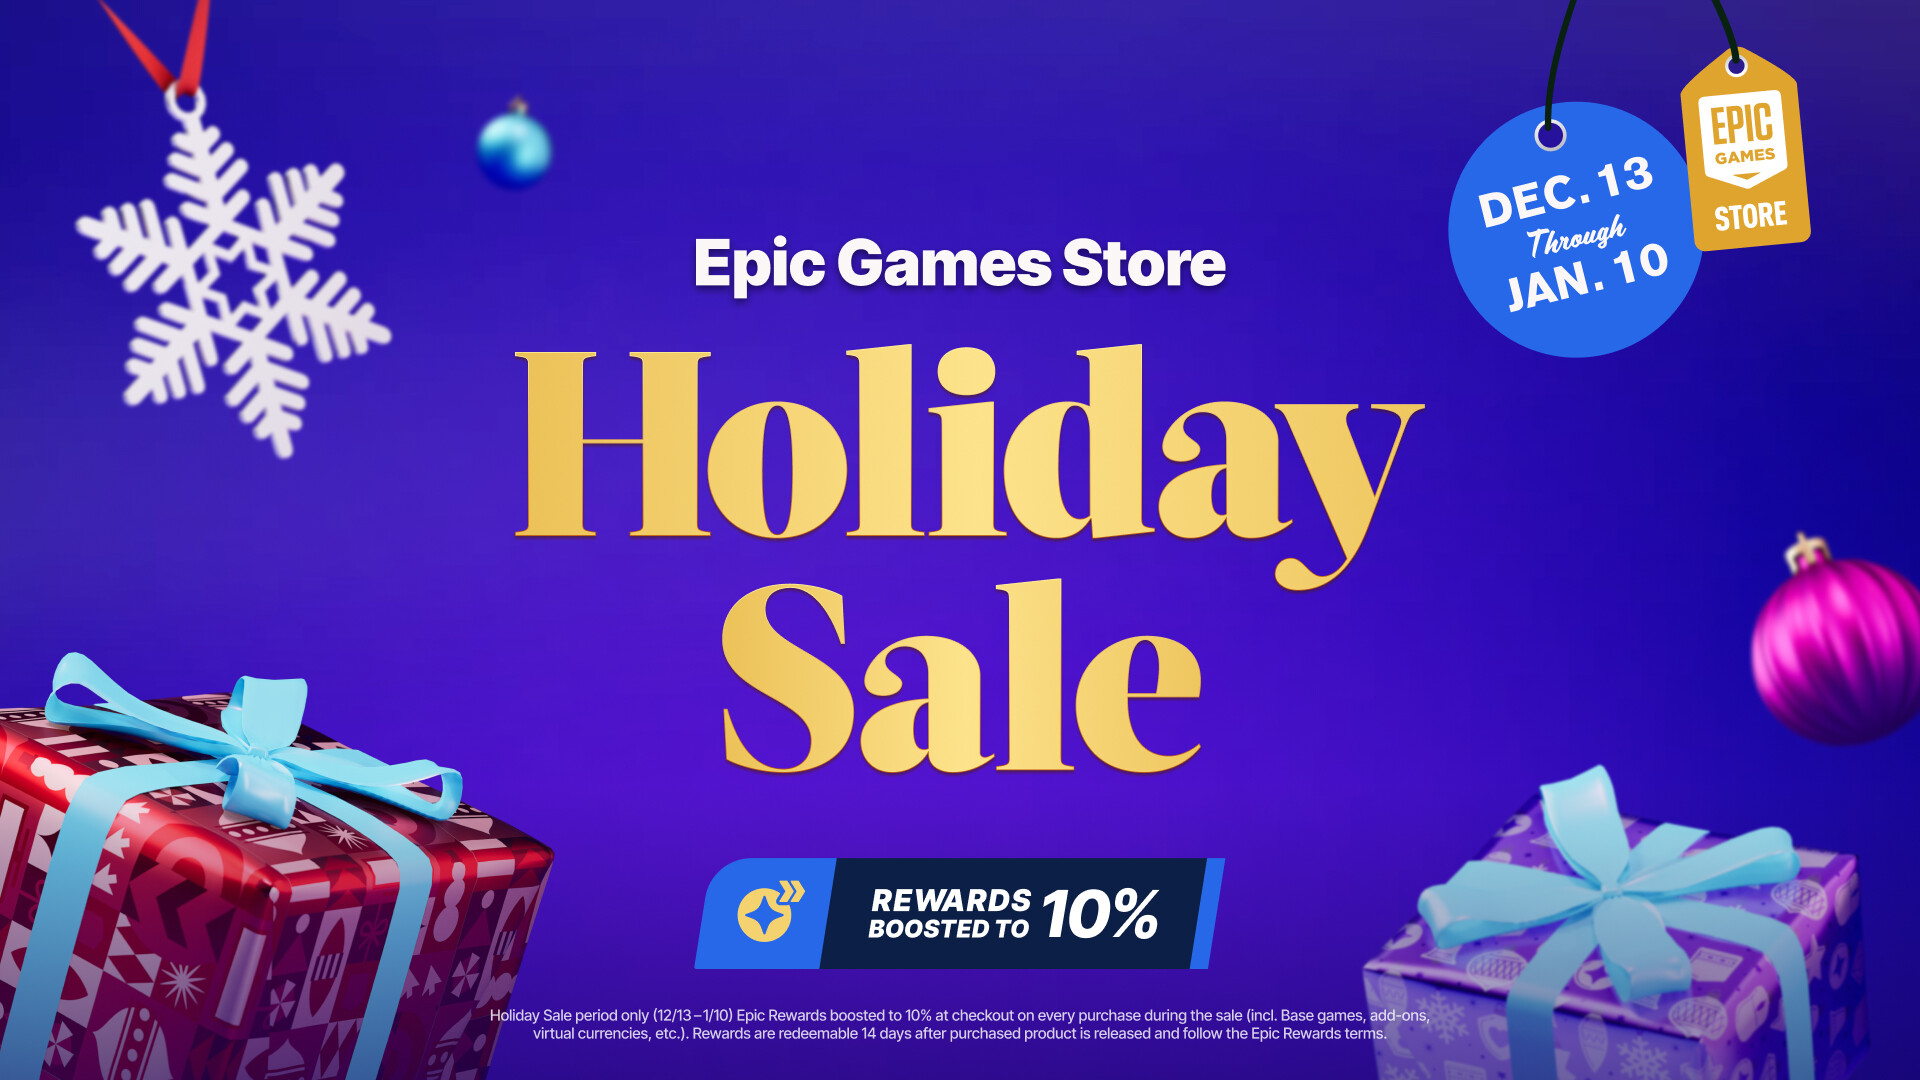 SYNCED  Download and Play for Free - Epic Games Store